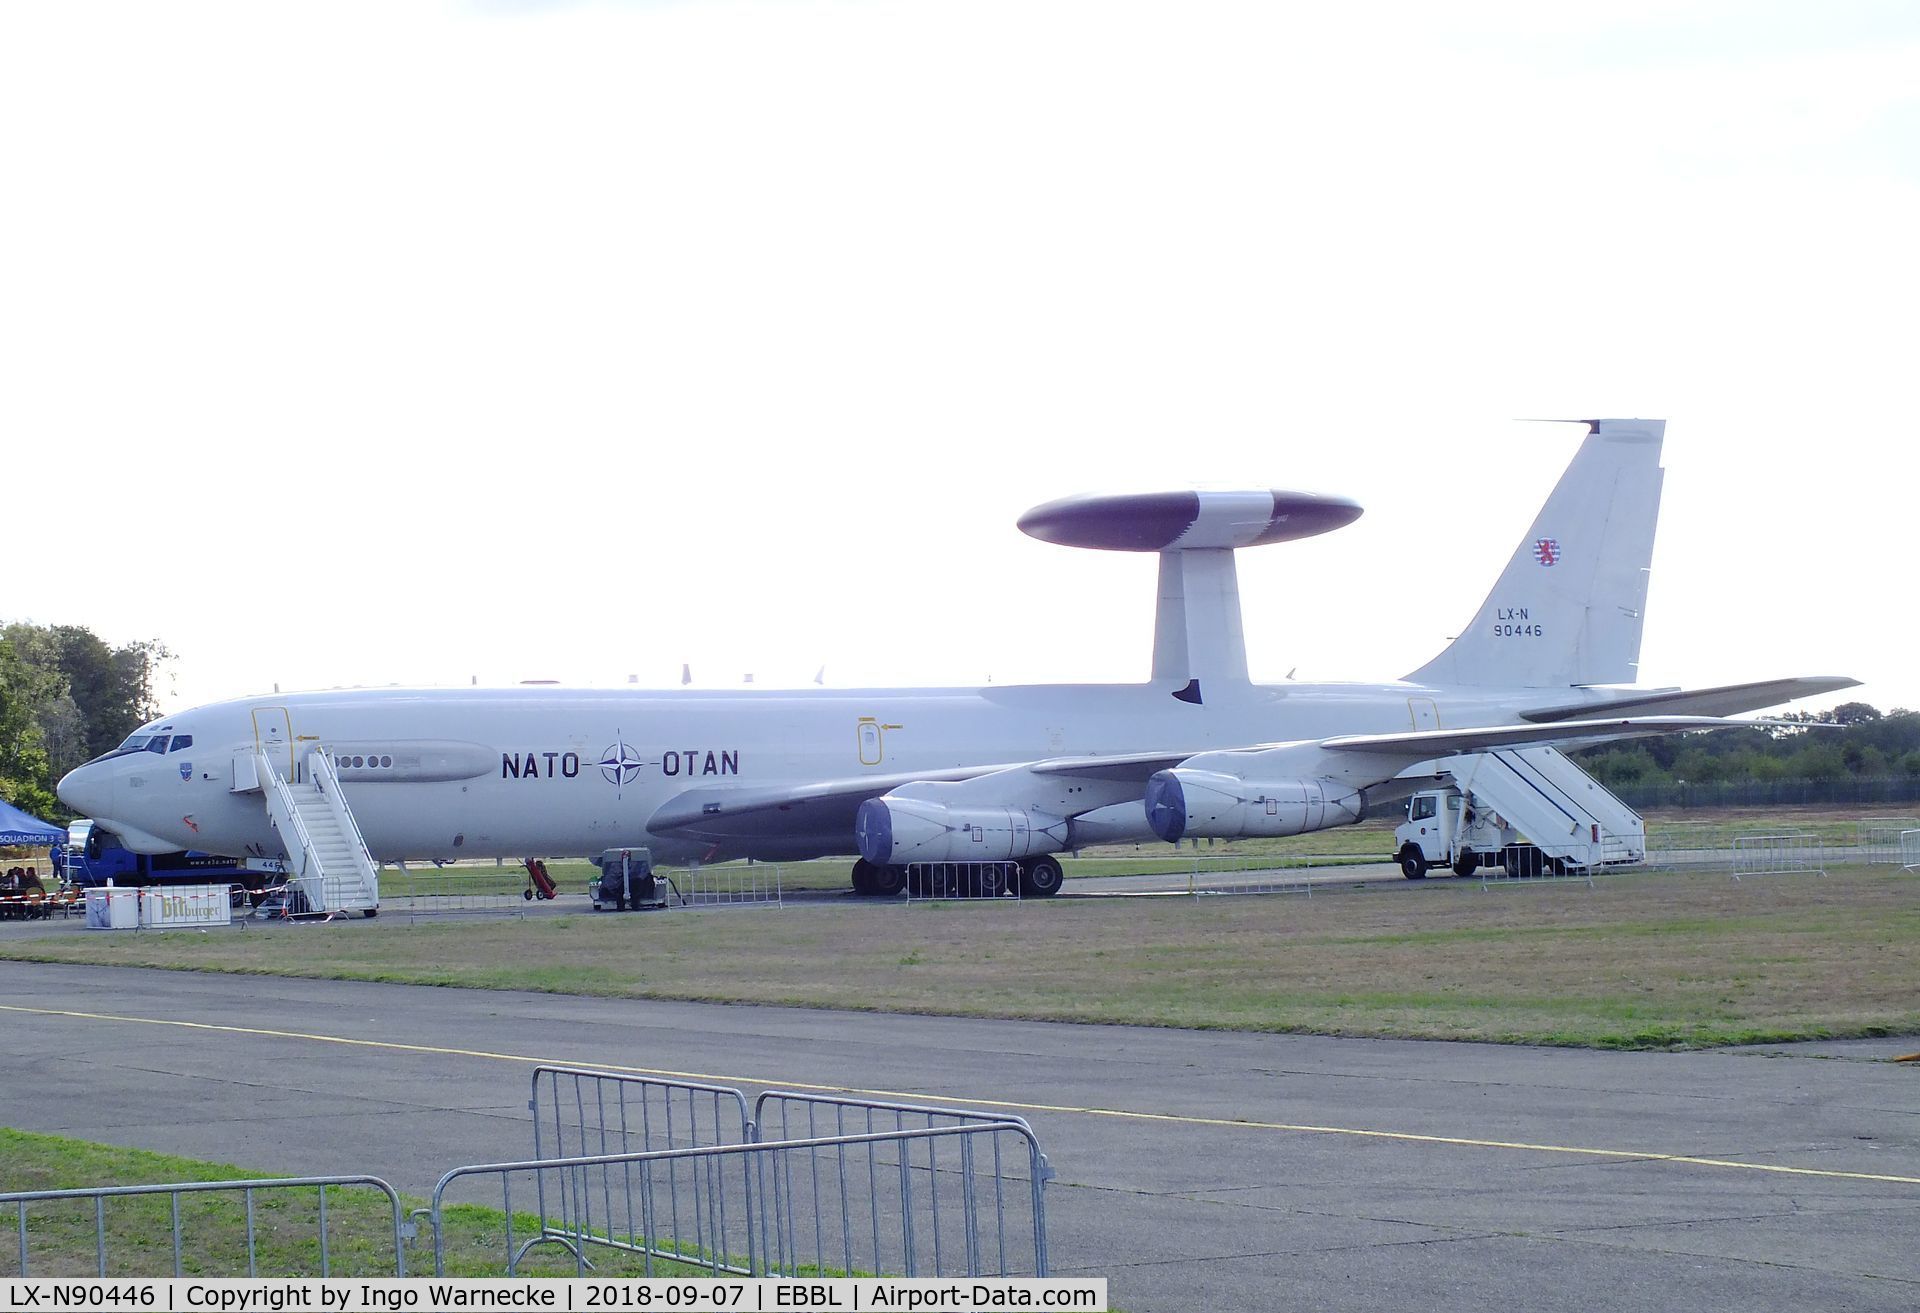 LX-N90446, 1982 Boeing E-3A Sentry C/N 22841, Boeing E-3A Sentry of the NAEW&C E-3A Component at the 2018 BAFD spotters day, Kleine Brogel airbase